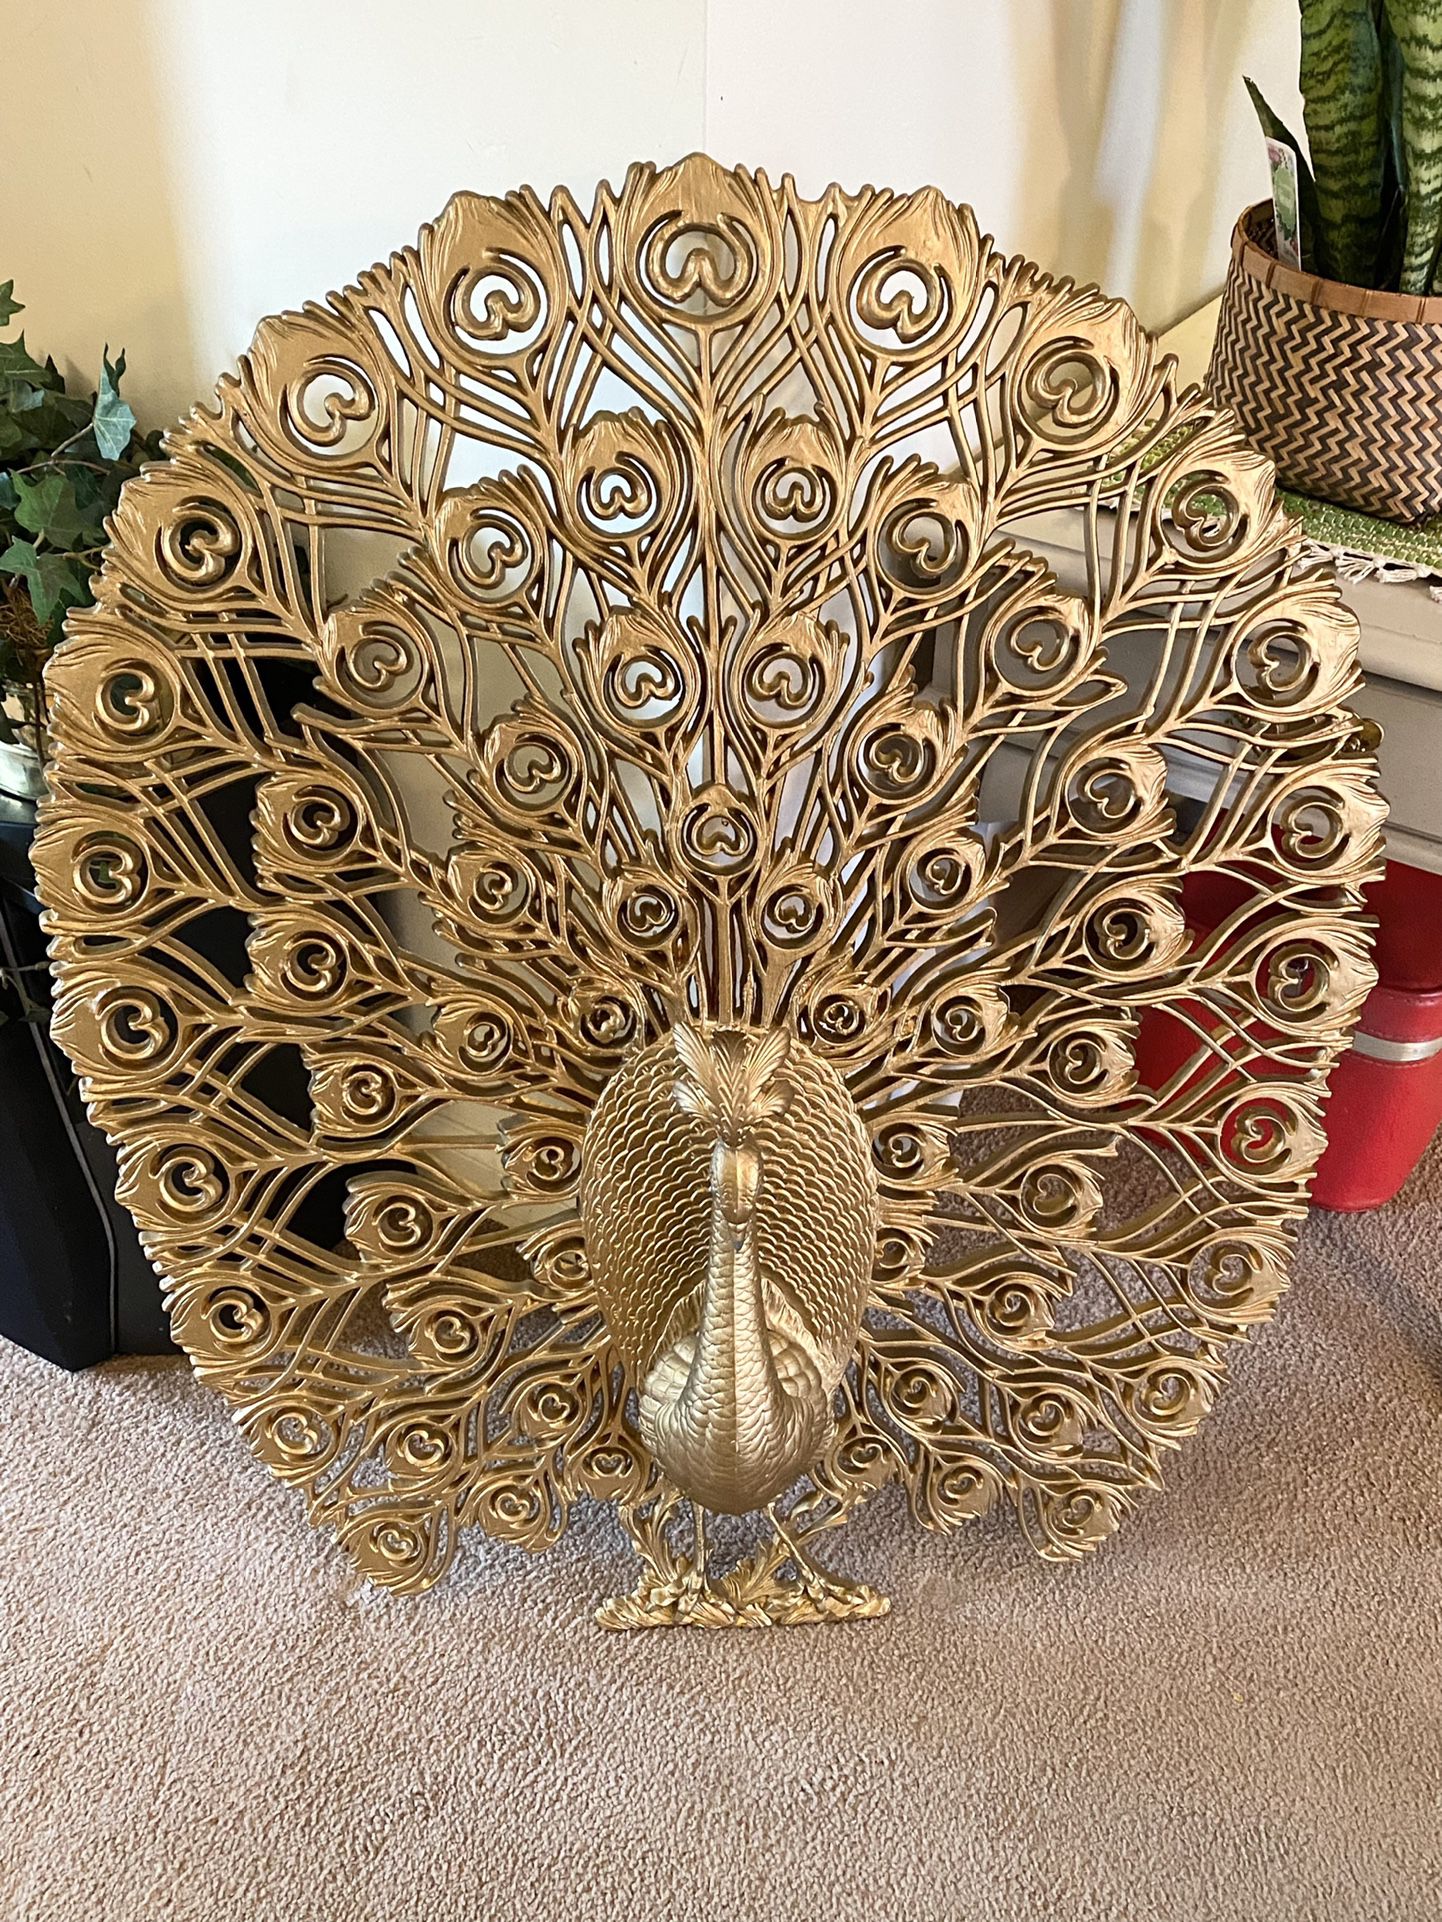 Vintage 1965 Burwood Gold Peacock Wall Hanging, Large 34” Peacock, Statement Wall Decor